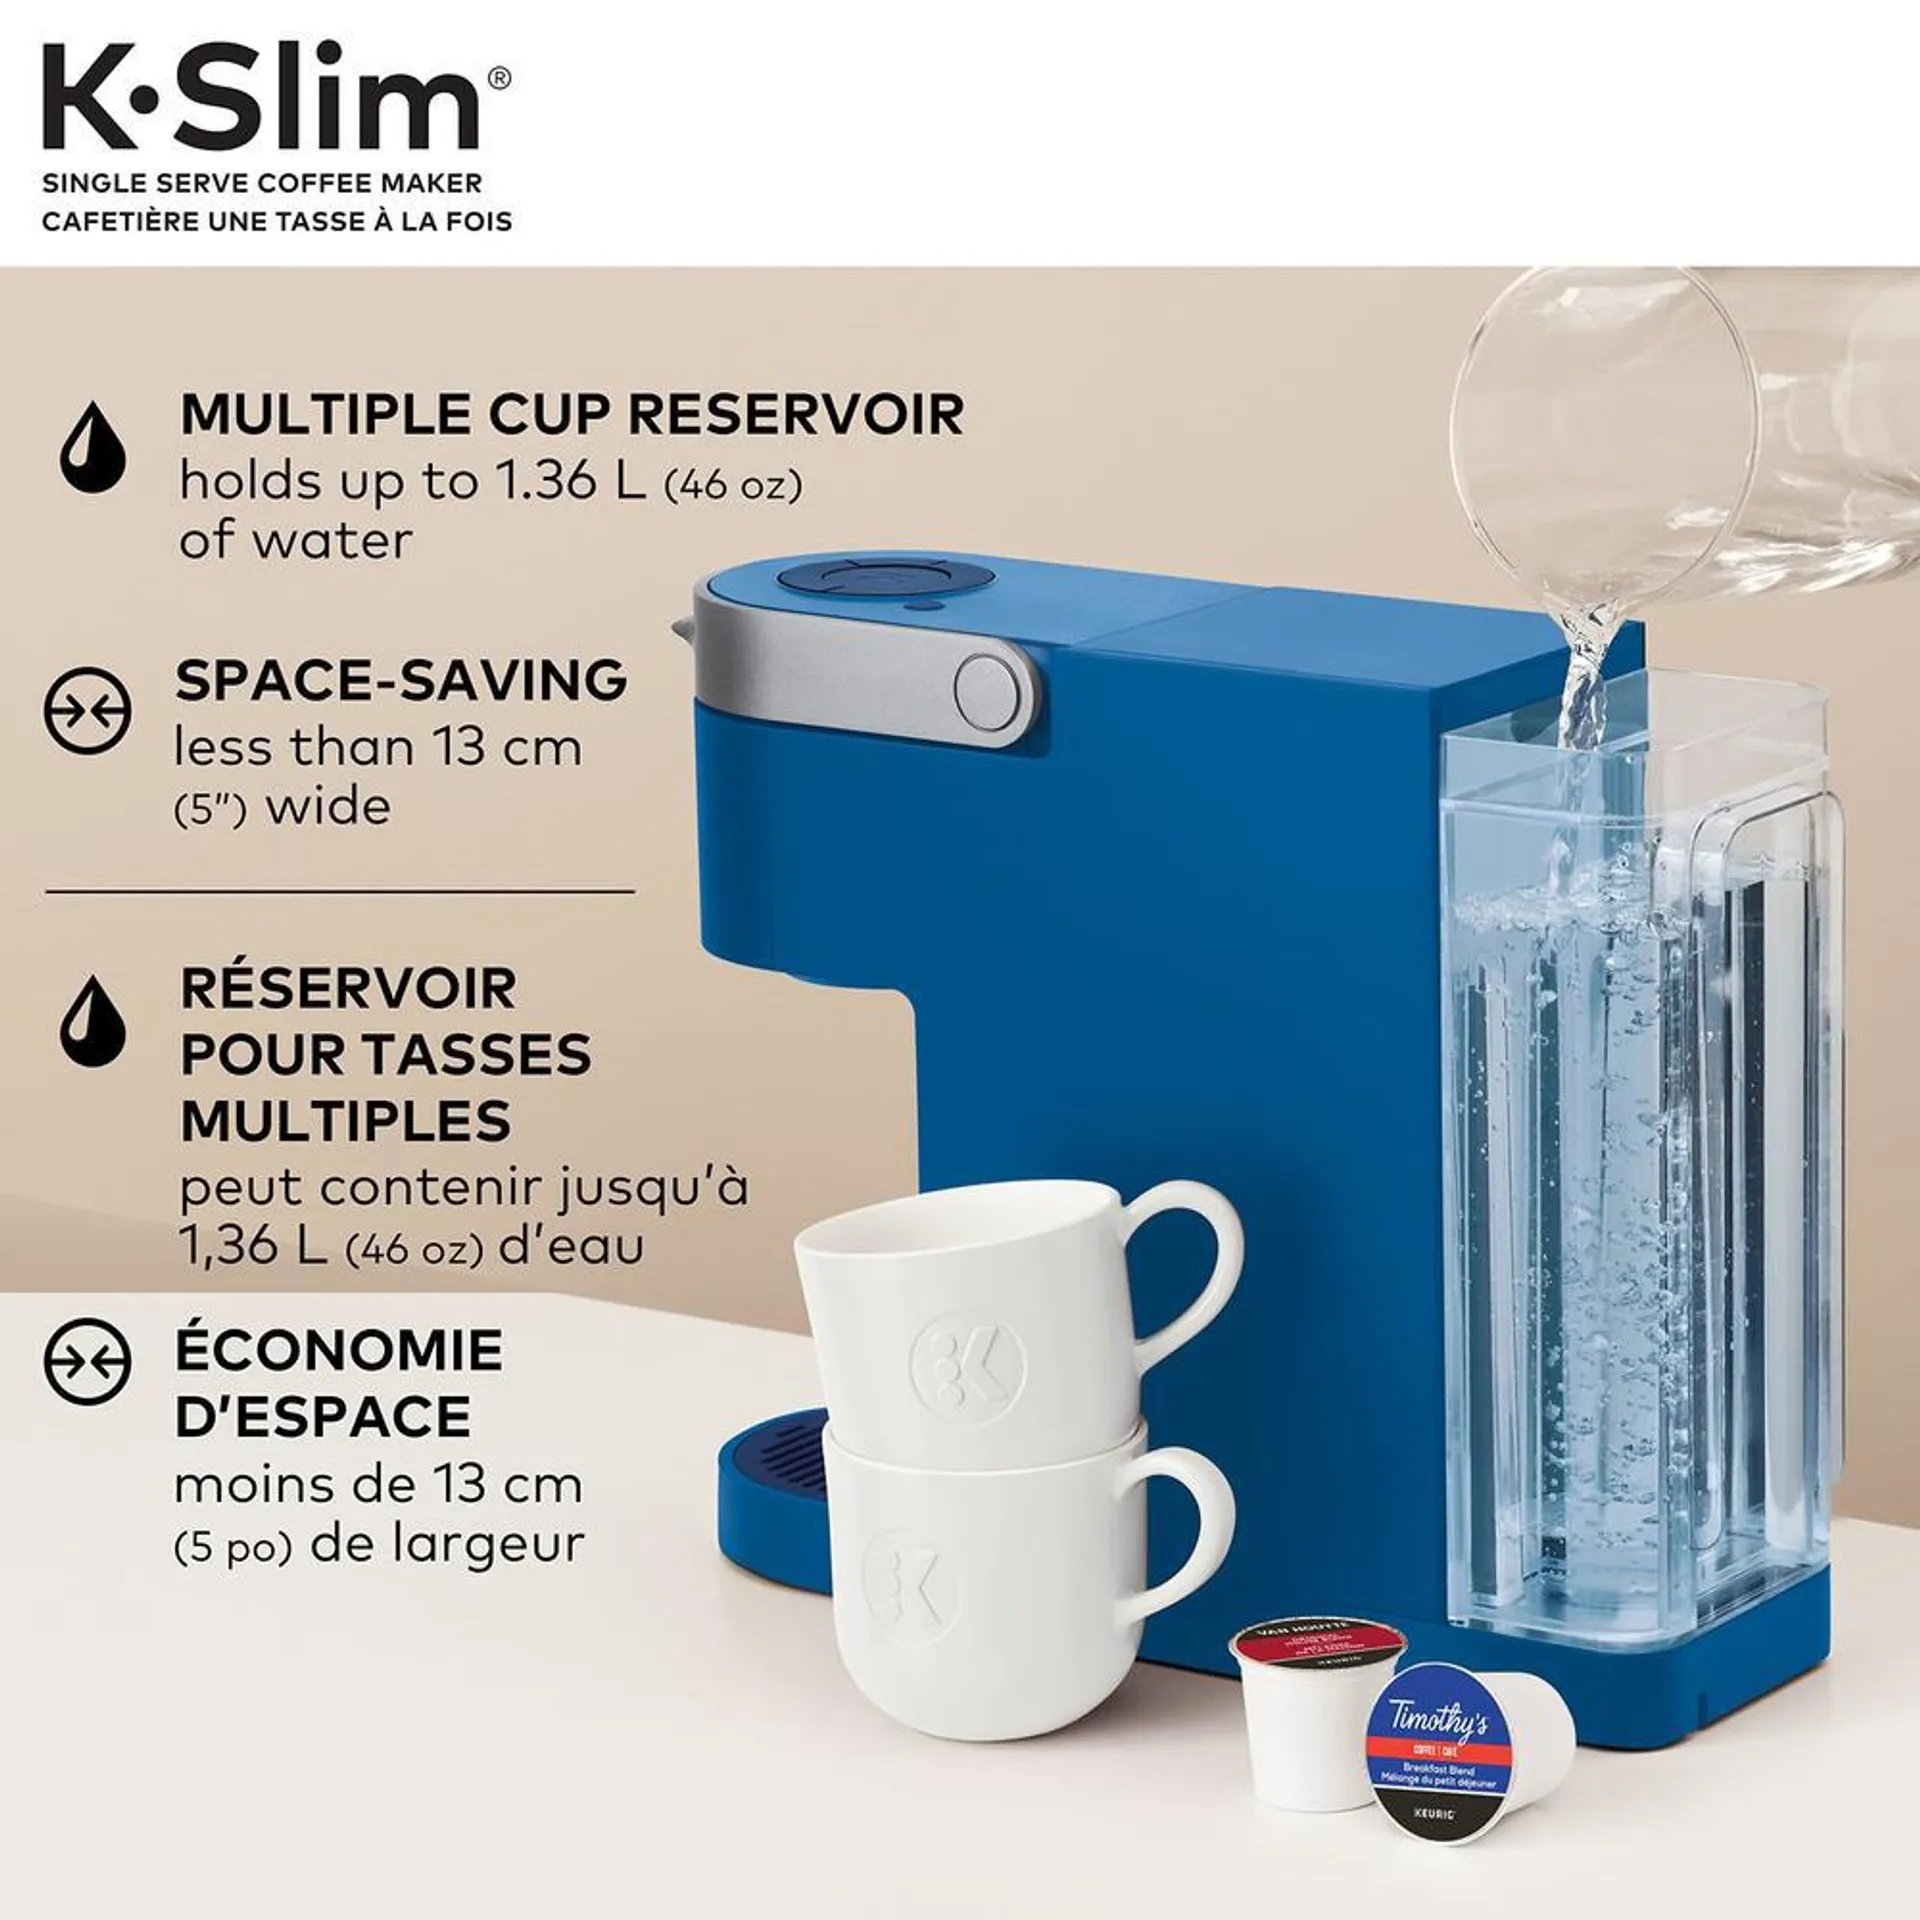 keurig k-slim single serve k-cup pod coffee maker, featuring simple push button controls and multistream technology, twilight